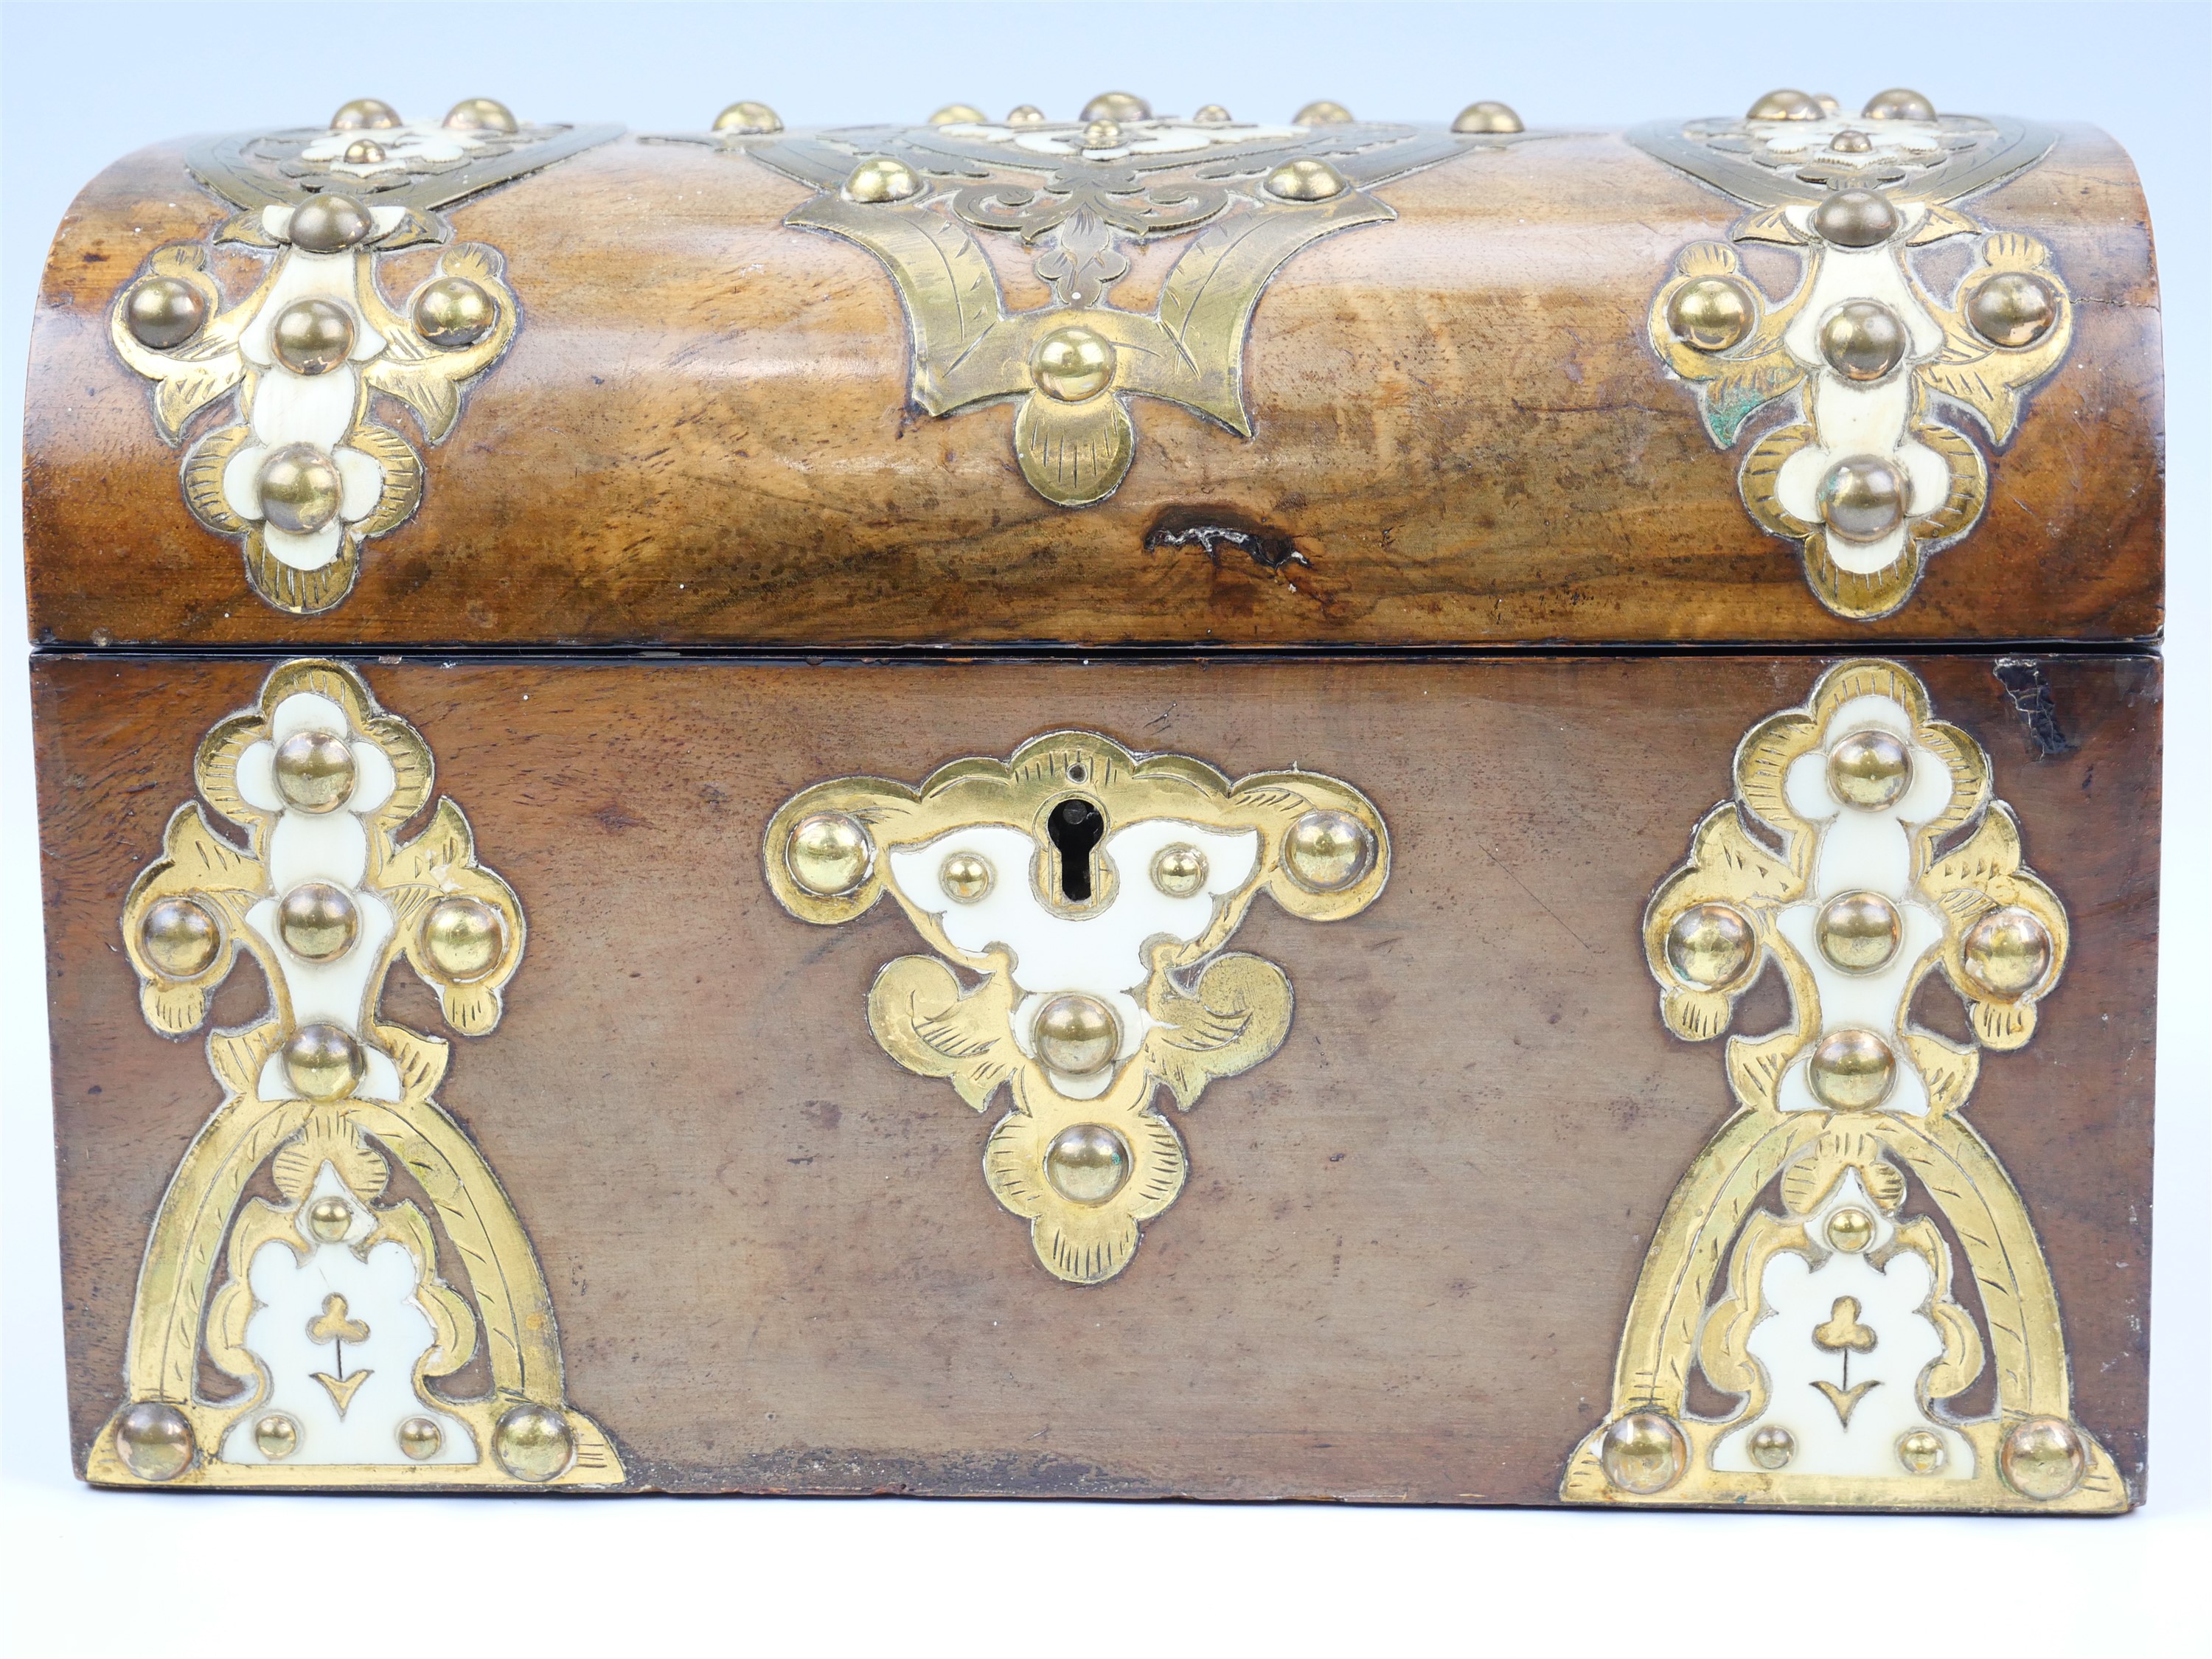 A Victorian walnut veneered dome top two compartment tea caddy, decorated with ivory, and pierced